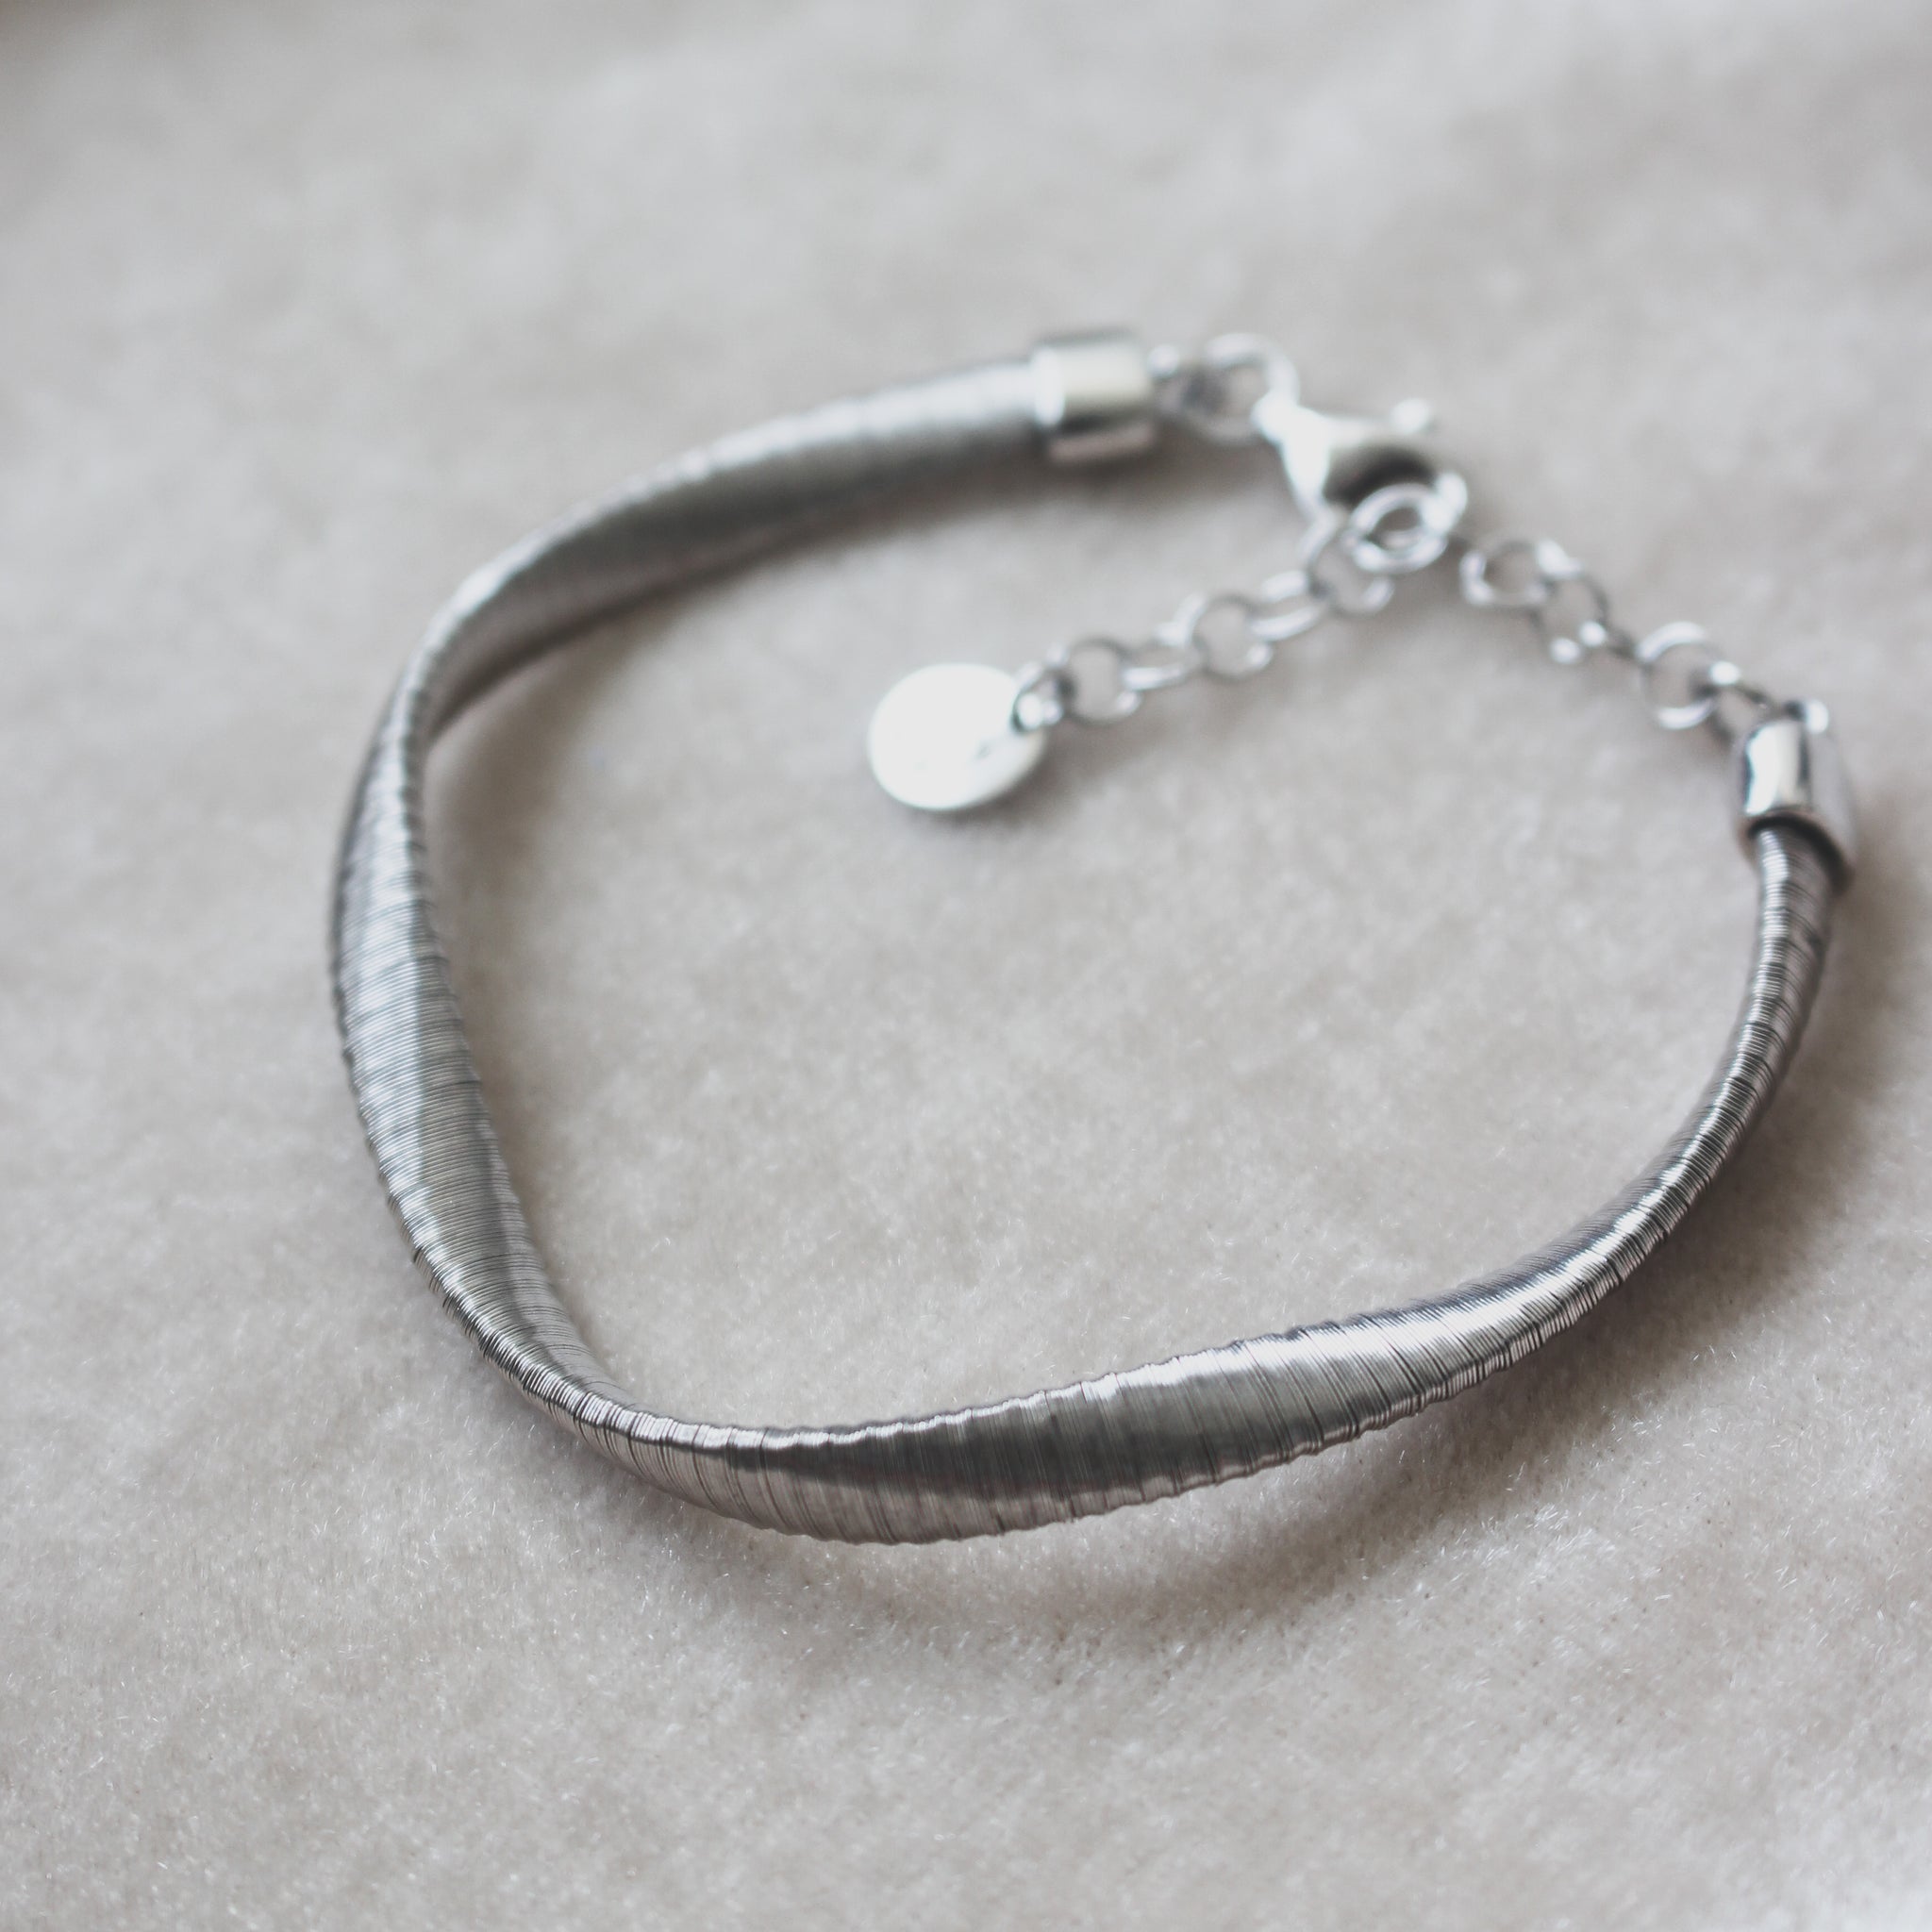 Best 20 Deals for 925 Italy Silver Chain Bracelet